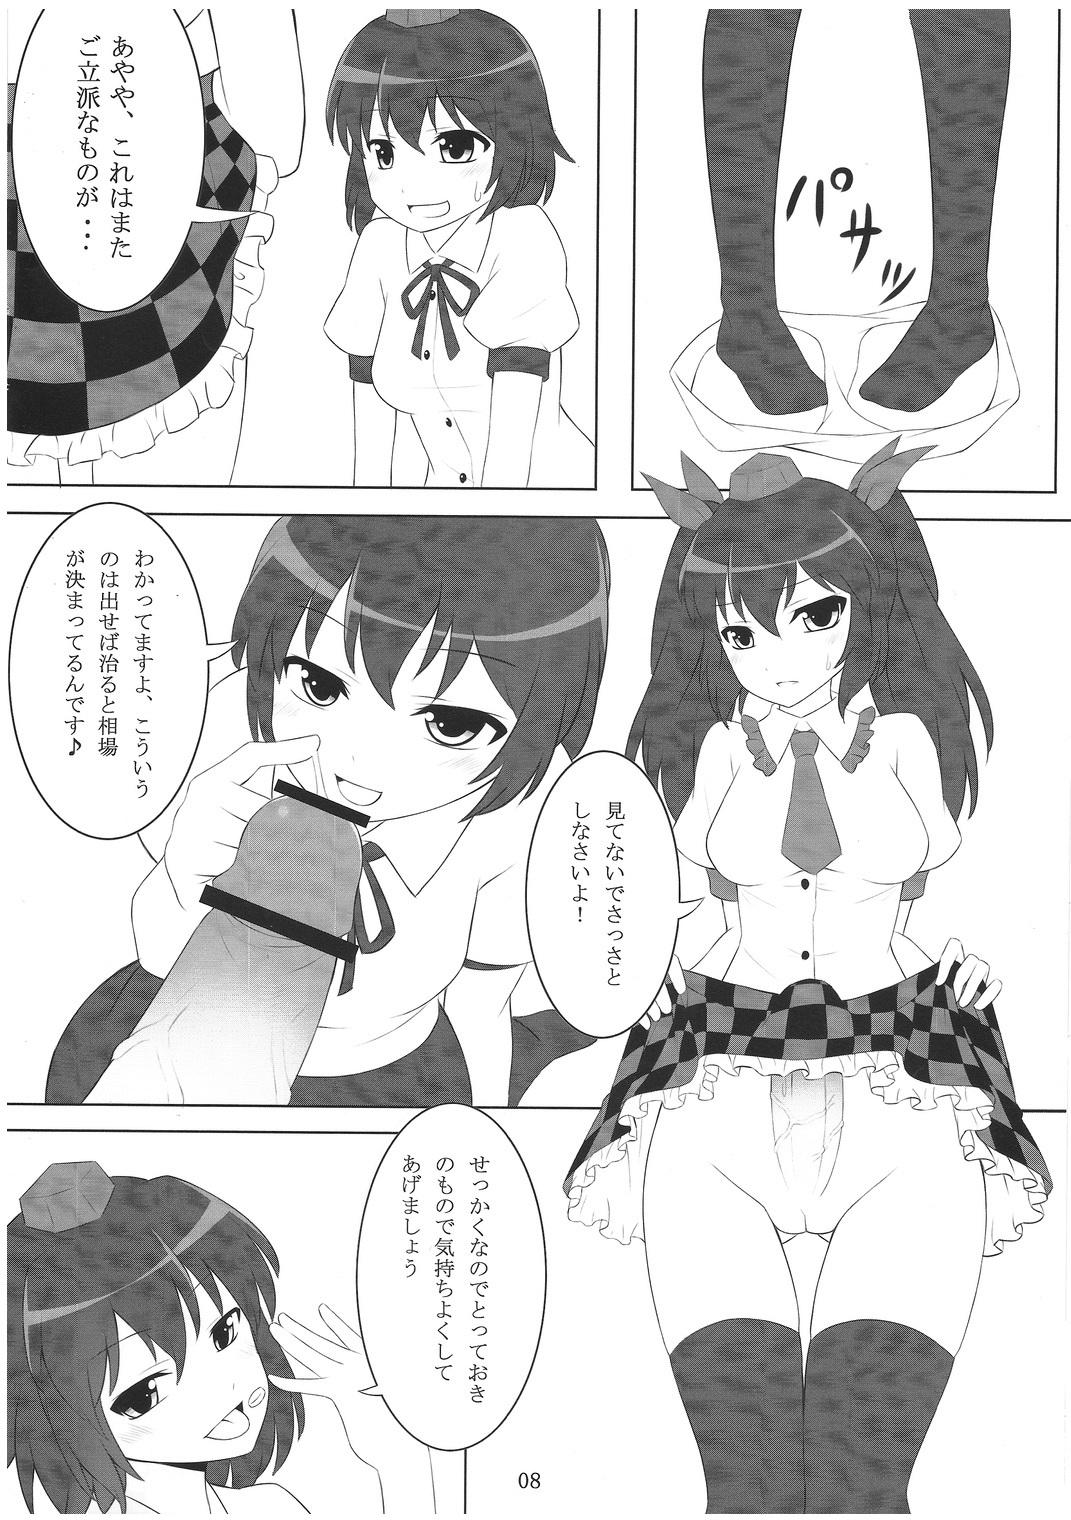 Perverted Touhou de Erohon - Touhou project Punished - Page 7